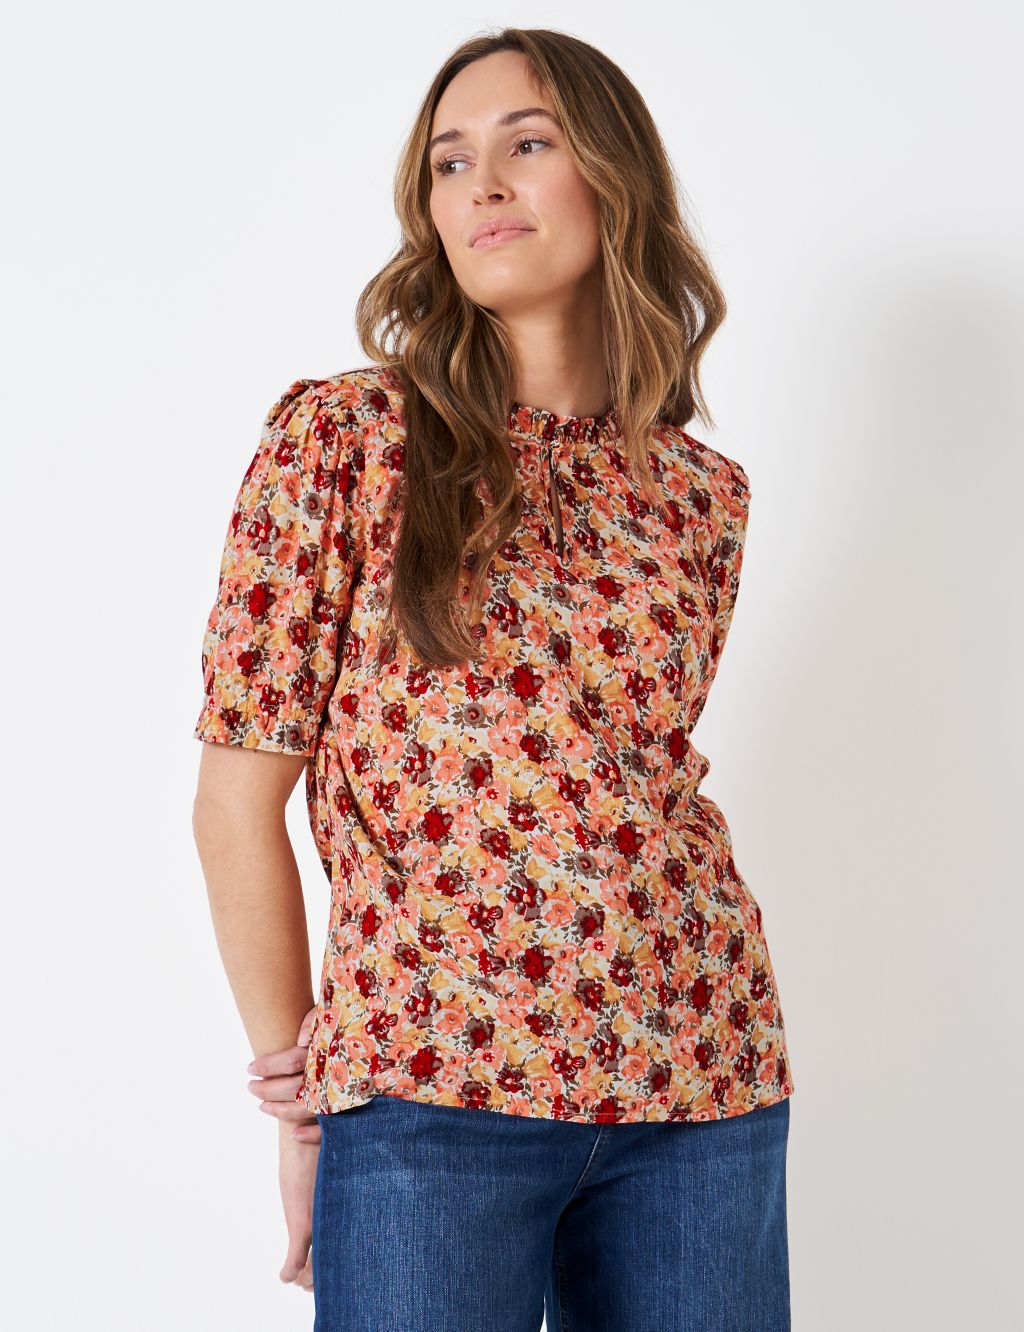 Ditsy Floral Crew Neck Puff Sleeve Blouse image 1